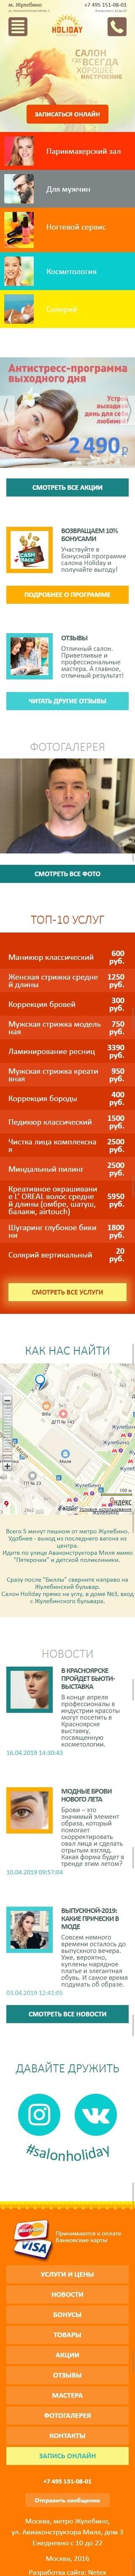 image of the mobile version of the site «Salonholiday»